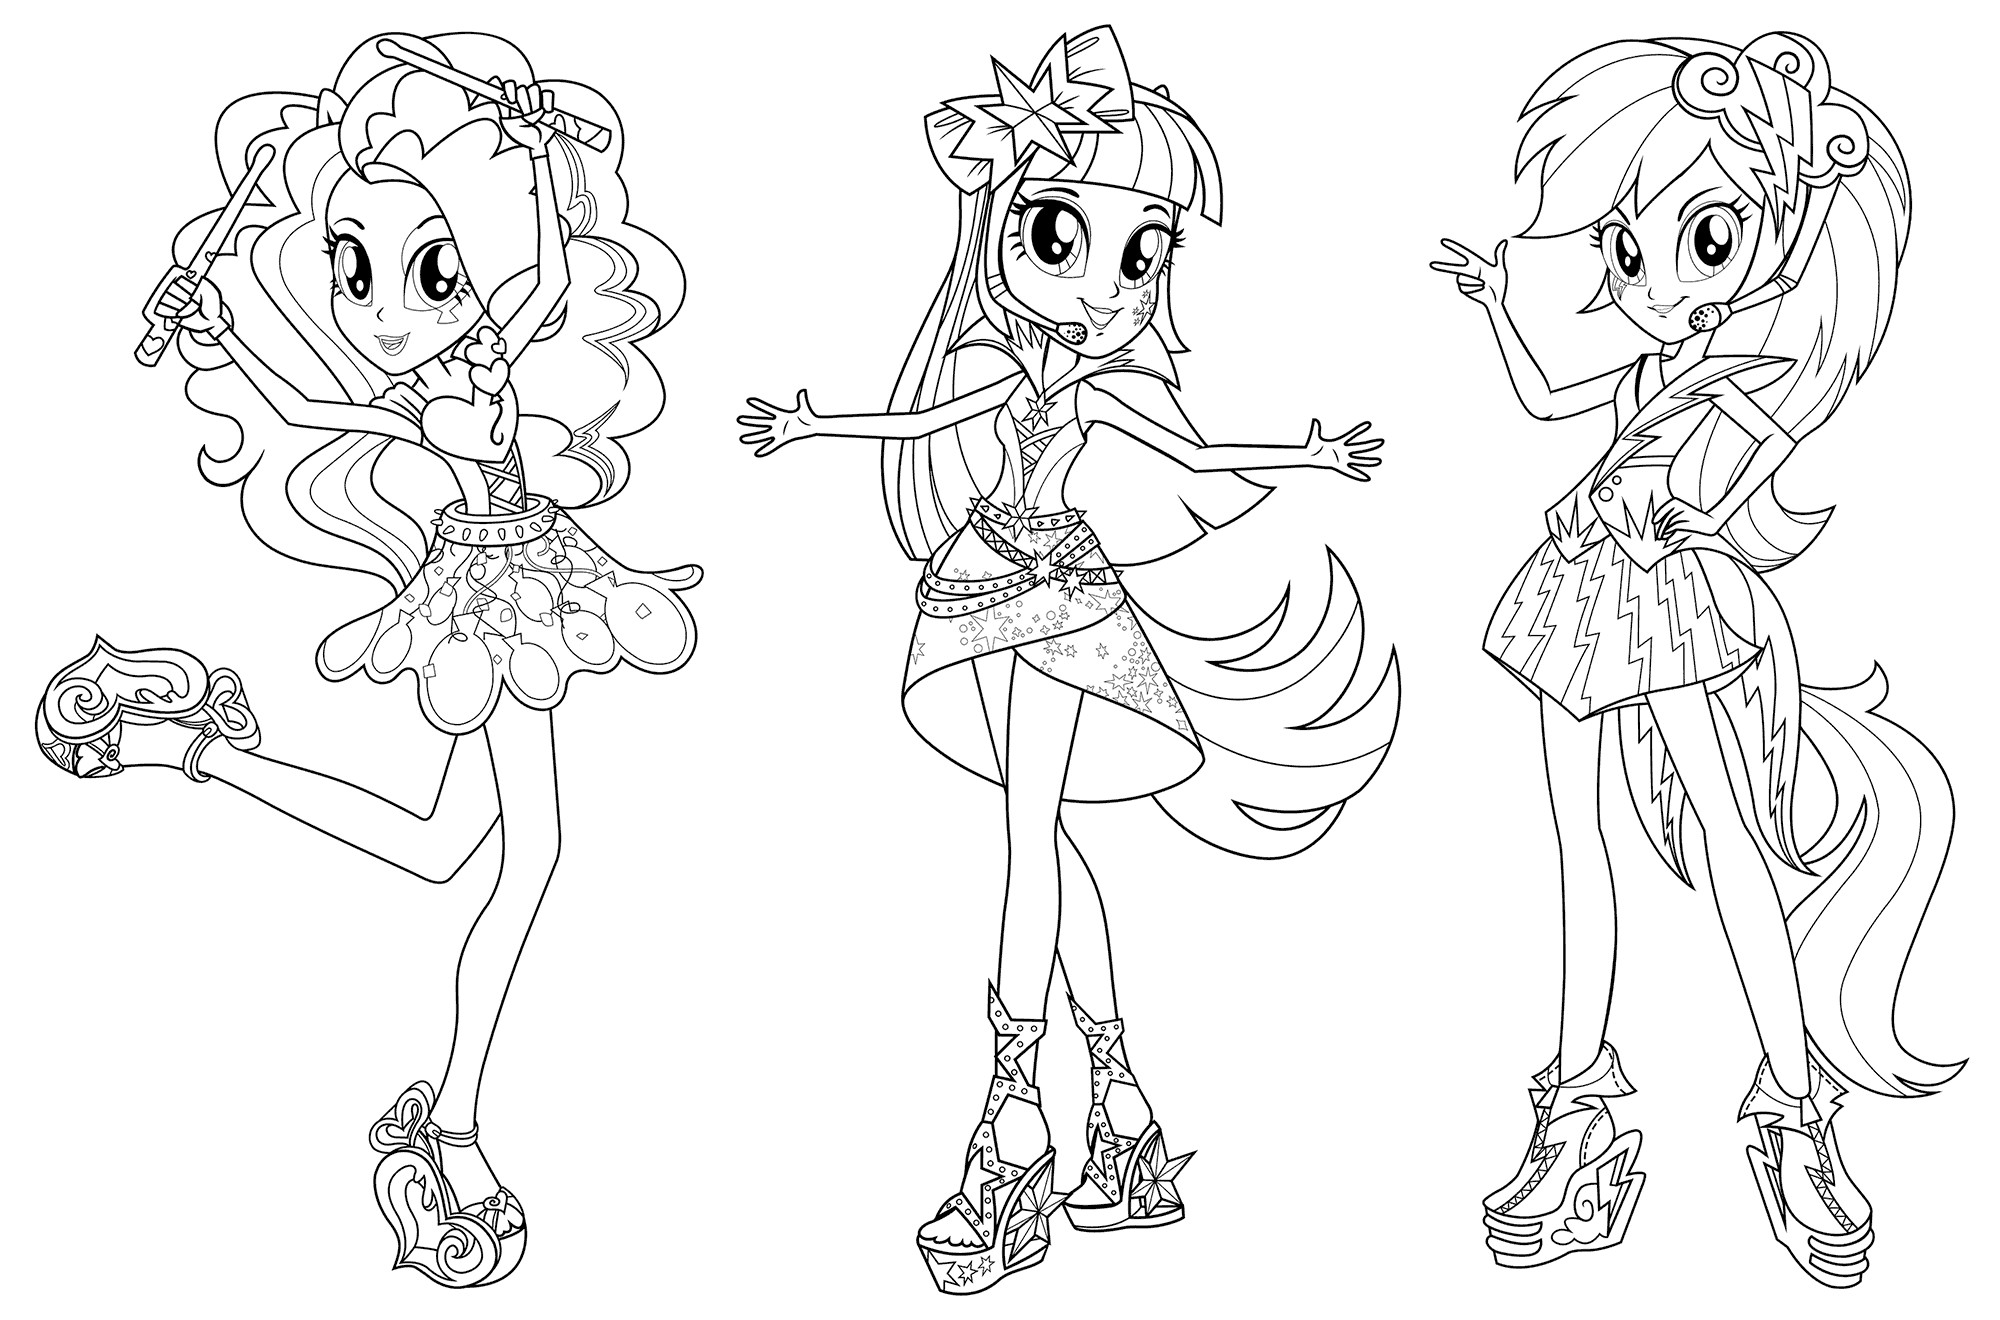 Equestria Girl Coloring Pages To Print at GetDrawings | Free download